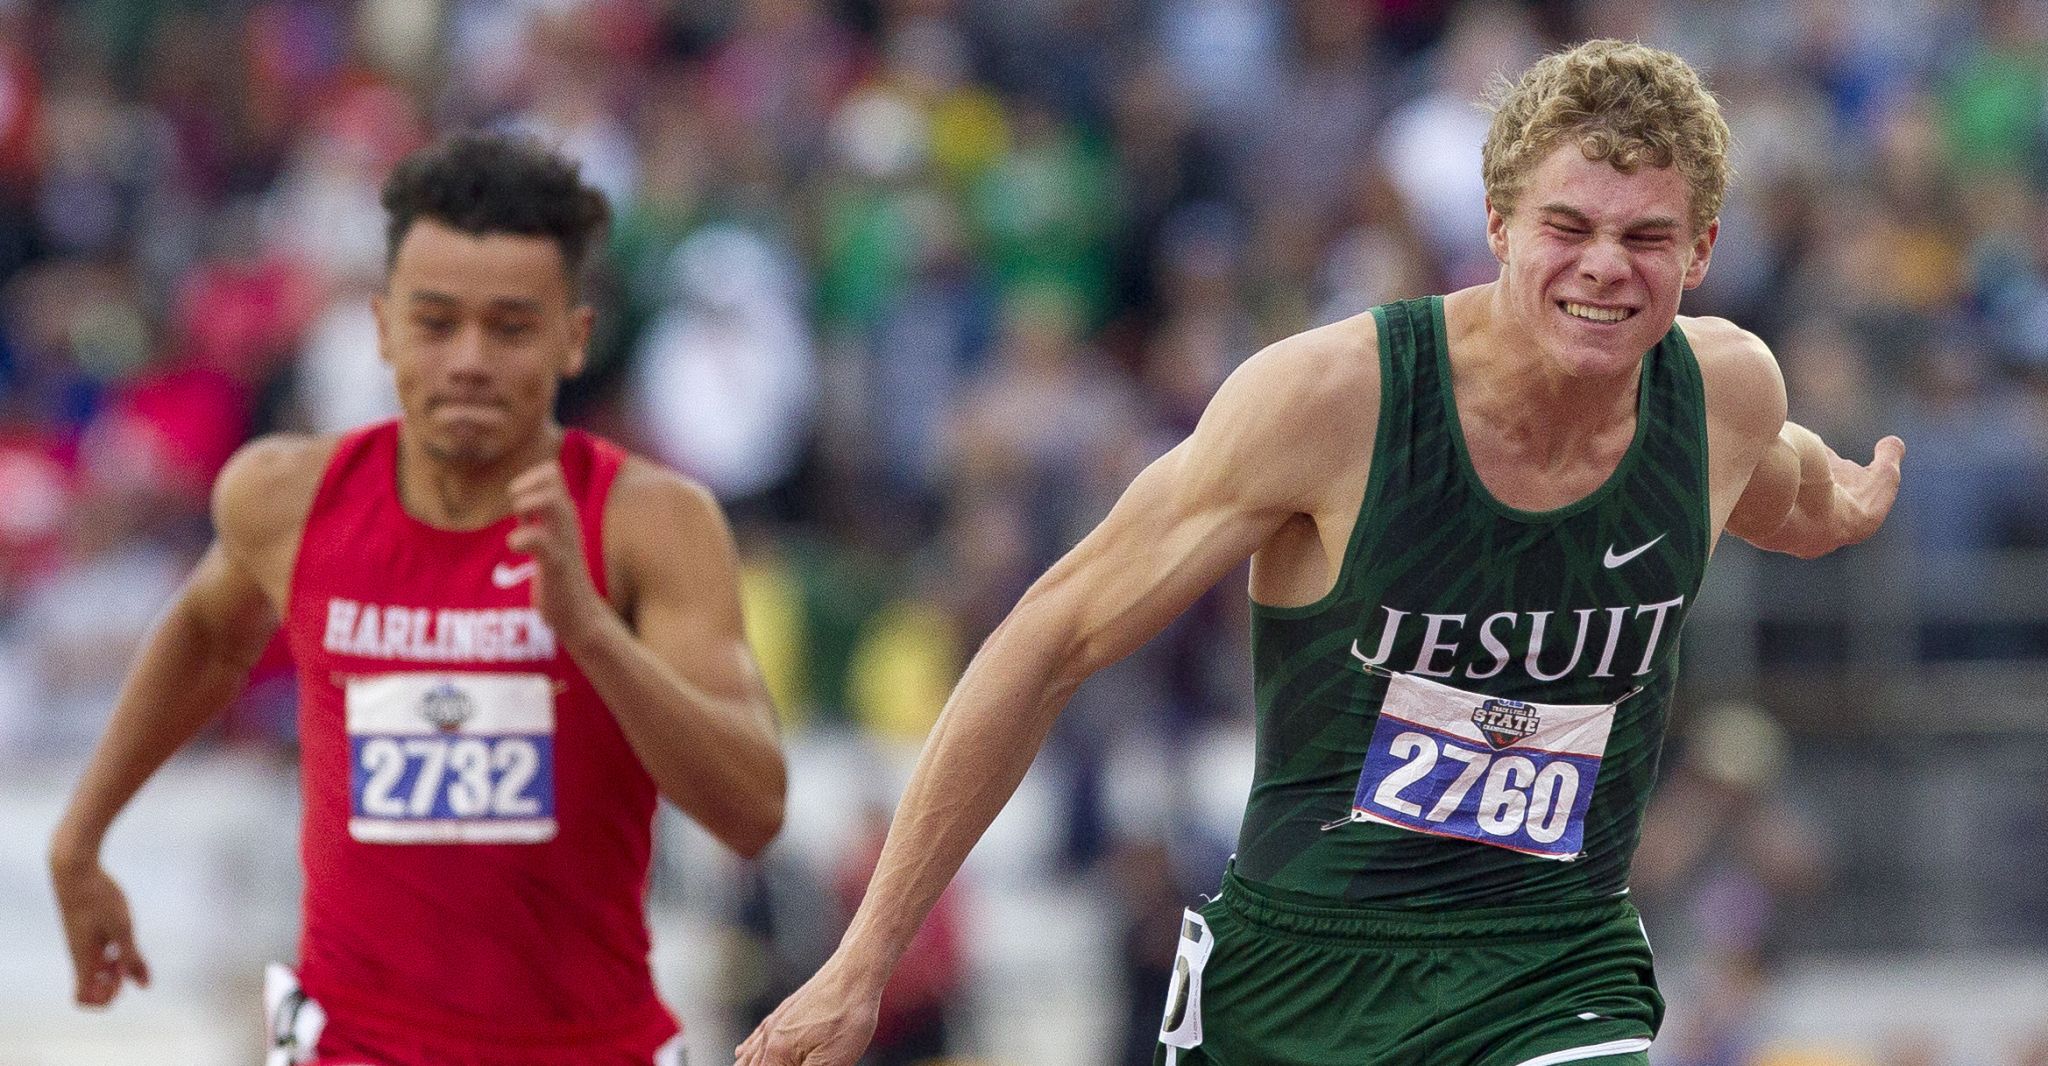 Strake Jesuit's Matthew Boling sets national high school record at